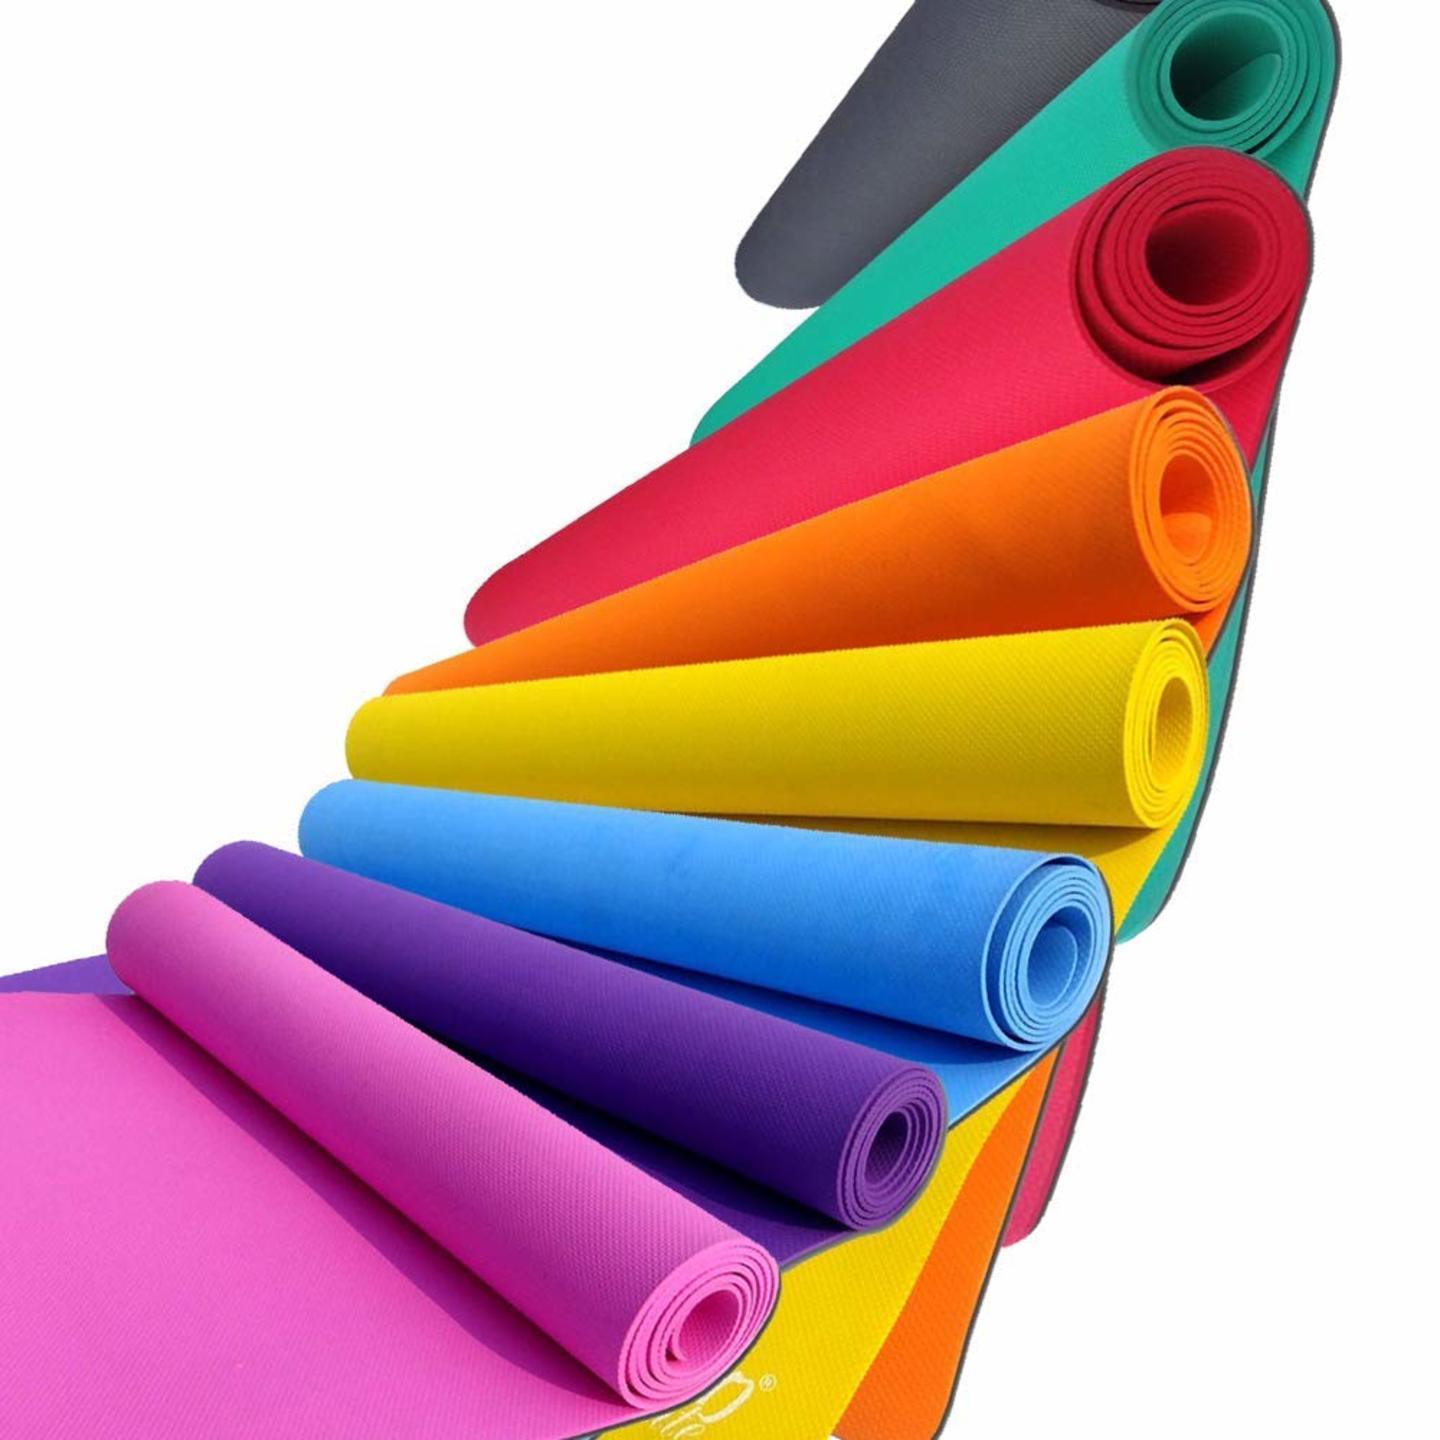 Handtex home Yoga and Exercise mat of 4mm Multicolour Yoga Mat